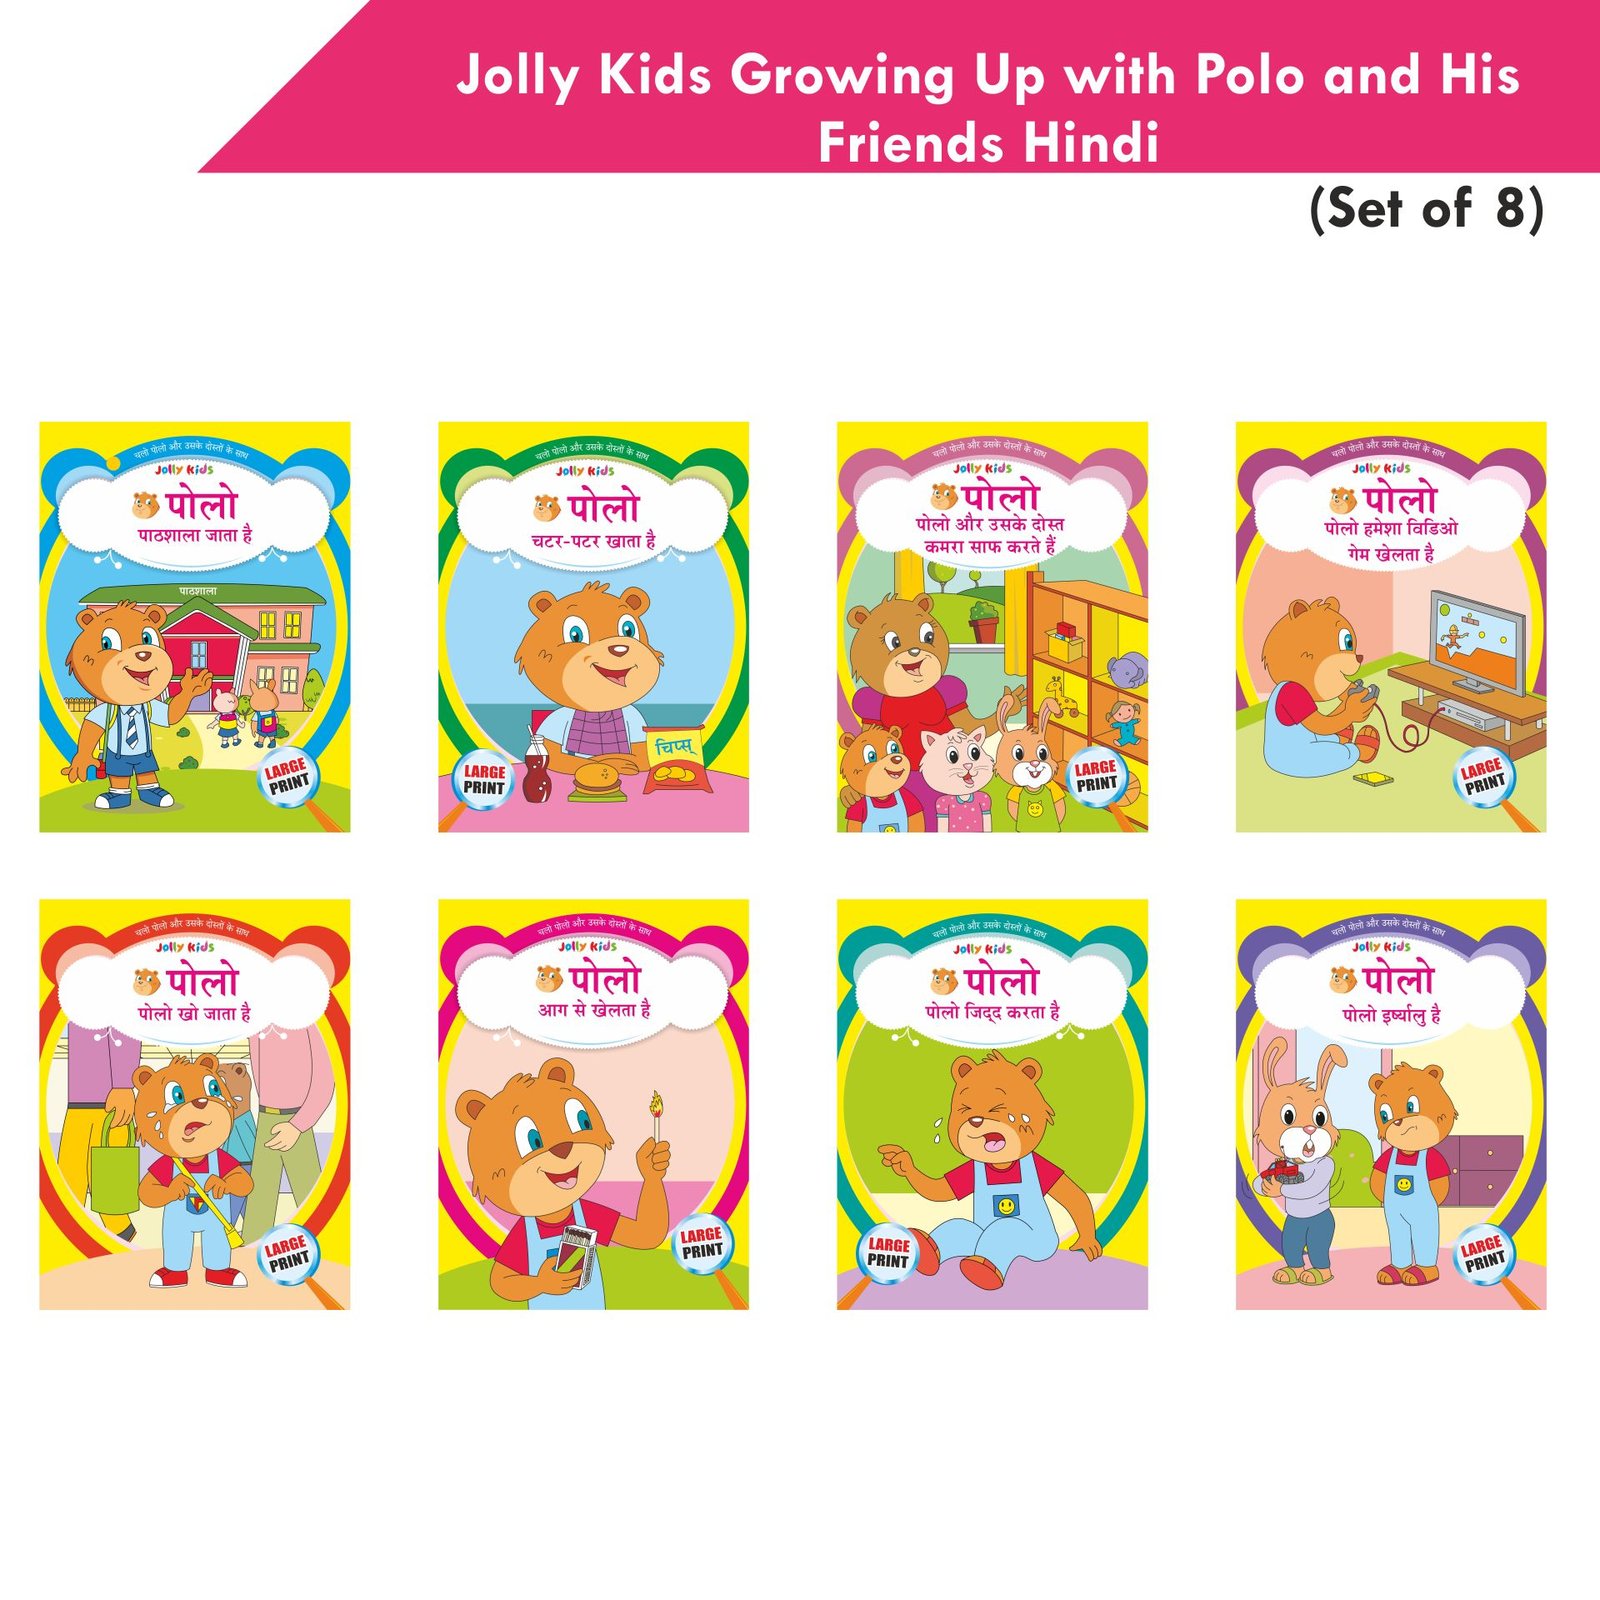 Jolly Kids Growing Up with Polo and His Friends Hindi Set of 8 1